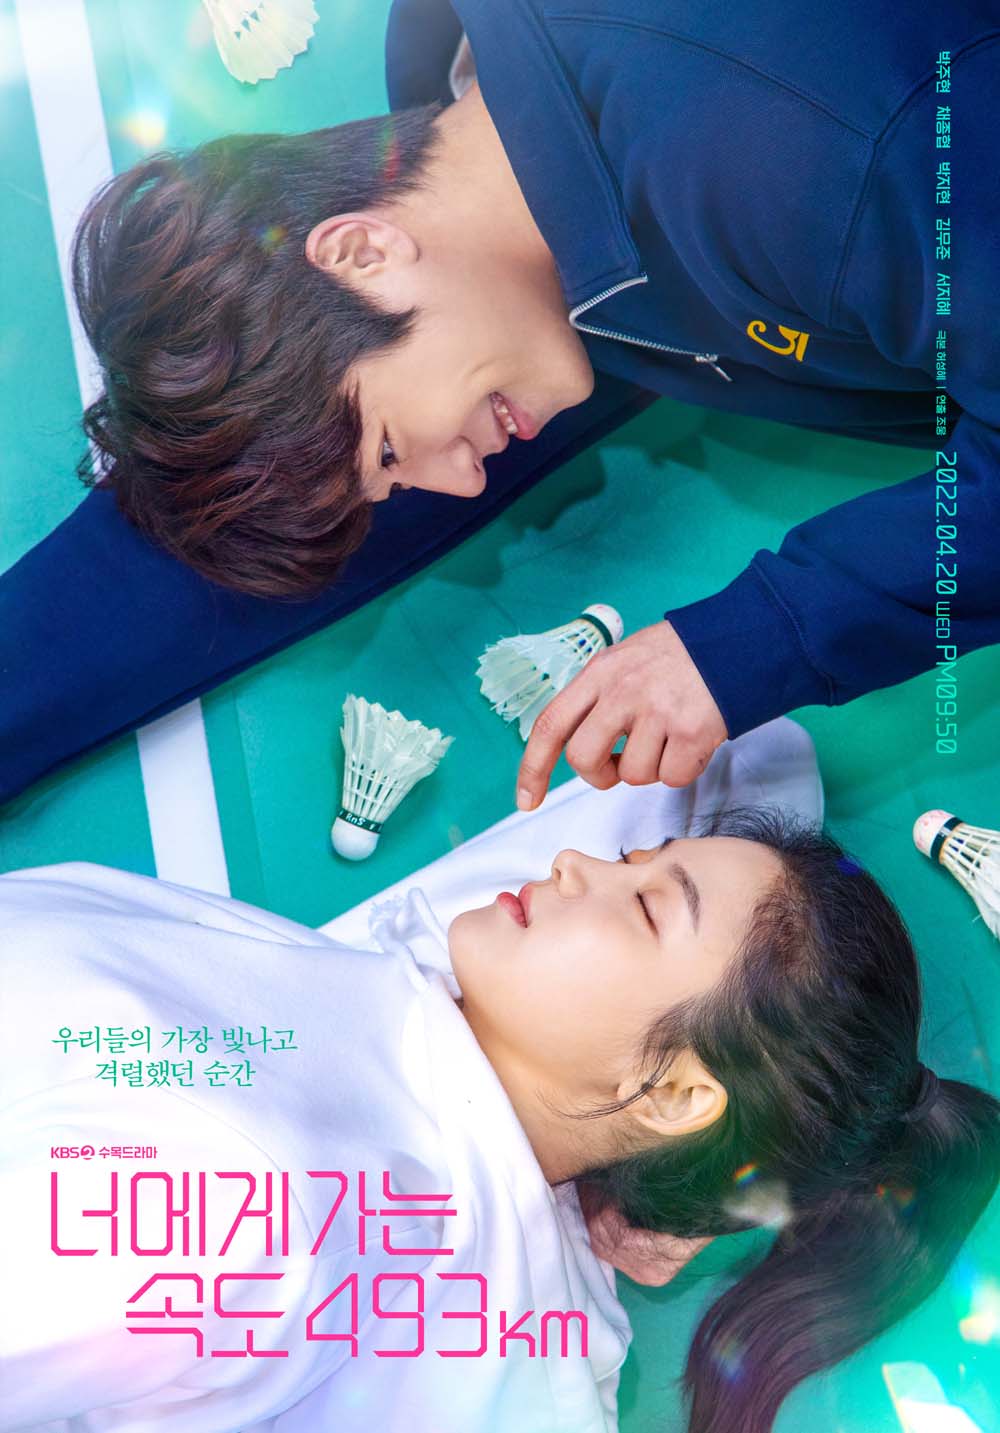 Restarting the badminton dream with Park Joo-hyun, Chae Jong-hyeop in Love All Play